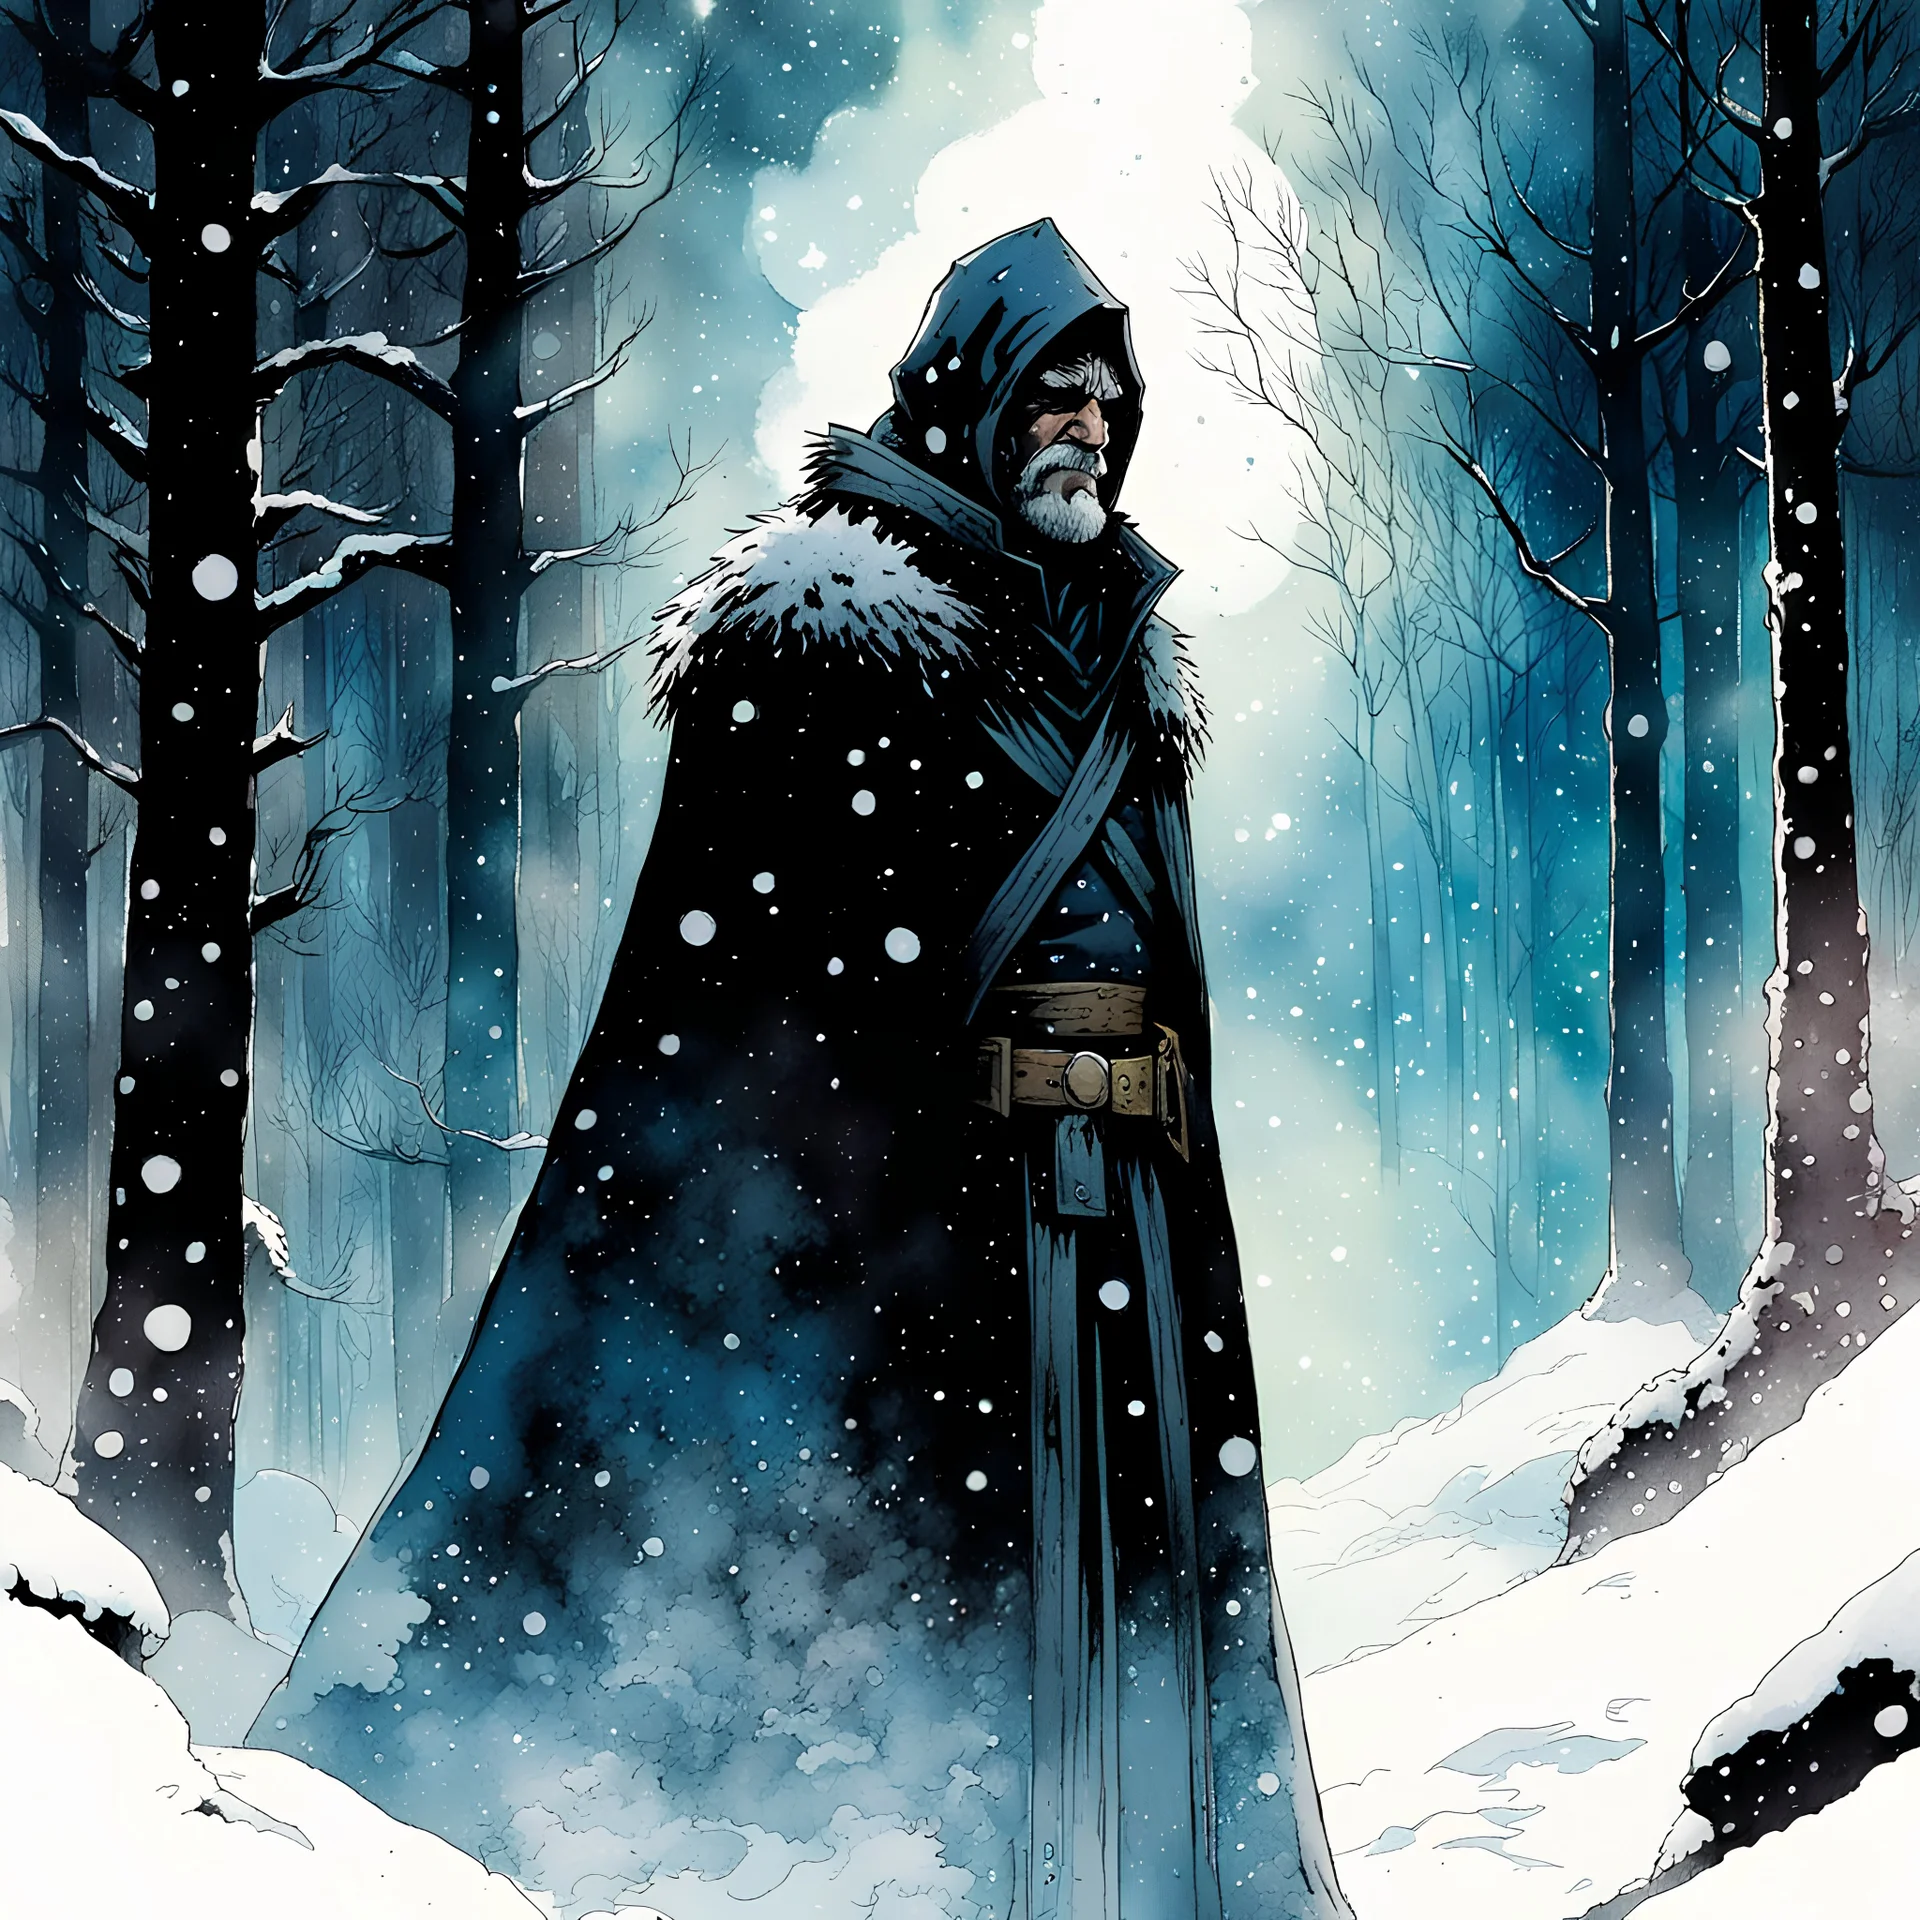 Die Schneekönigin, halfbody, Night, forest, snow, blizzard, created in inkwash and watercolor, carnival in the comic book art style of Mike Mignola, Bill Sienkiewicz and Jean Giraud Moebius, highly detailed, grainy, gritty textures, , dramatic natural lighting